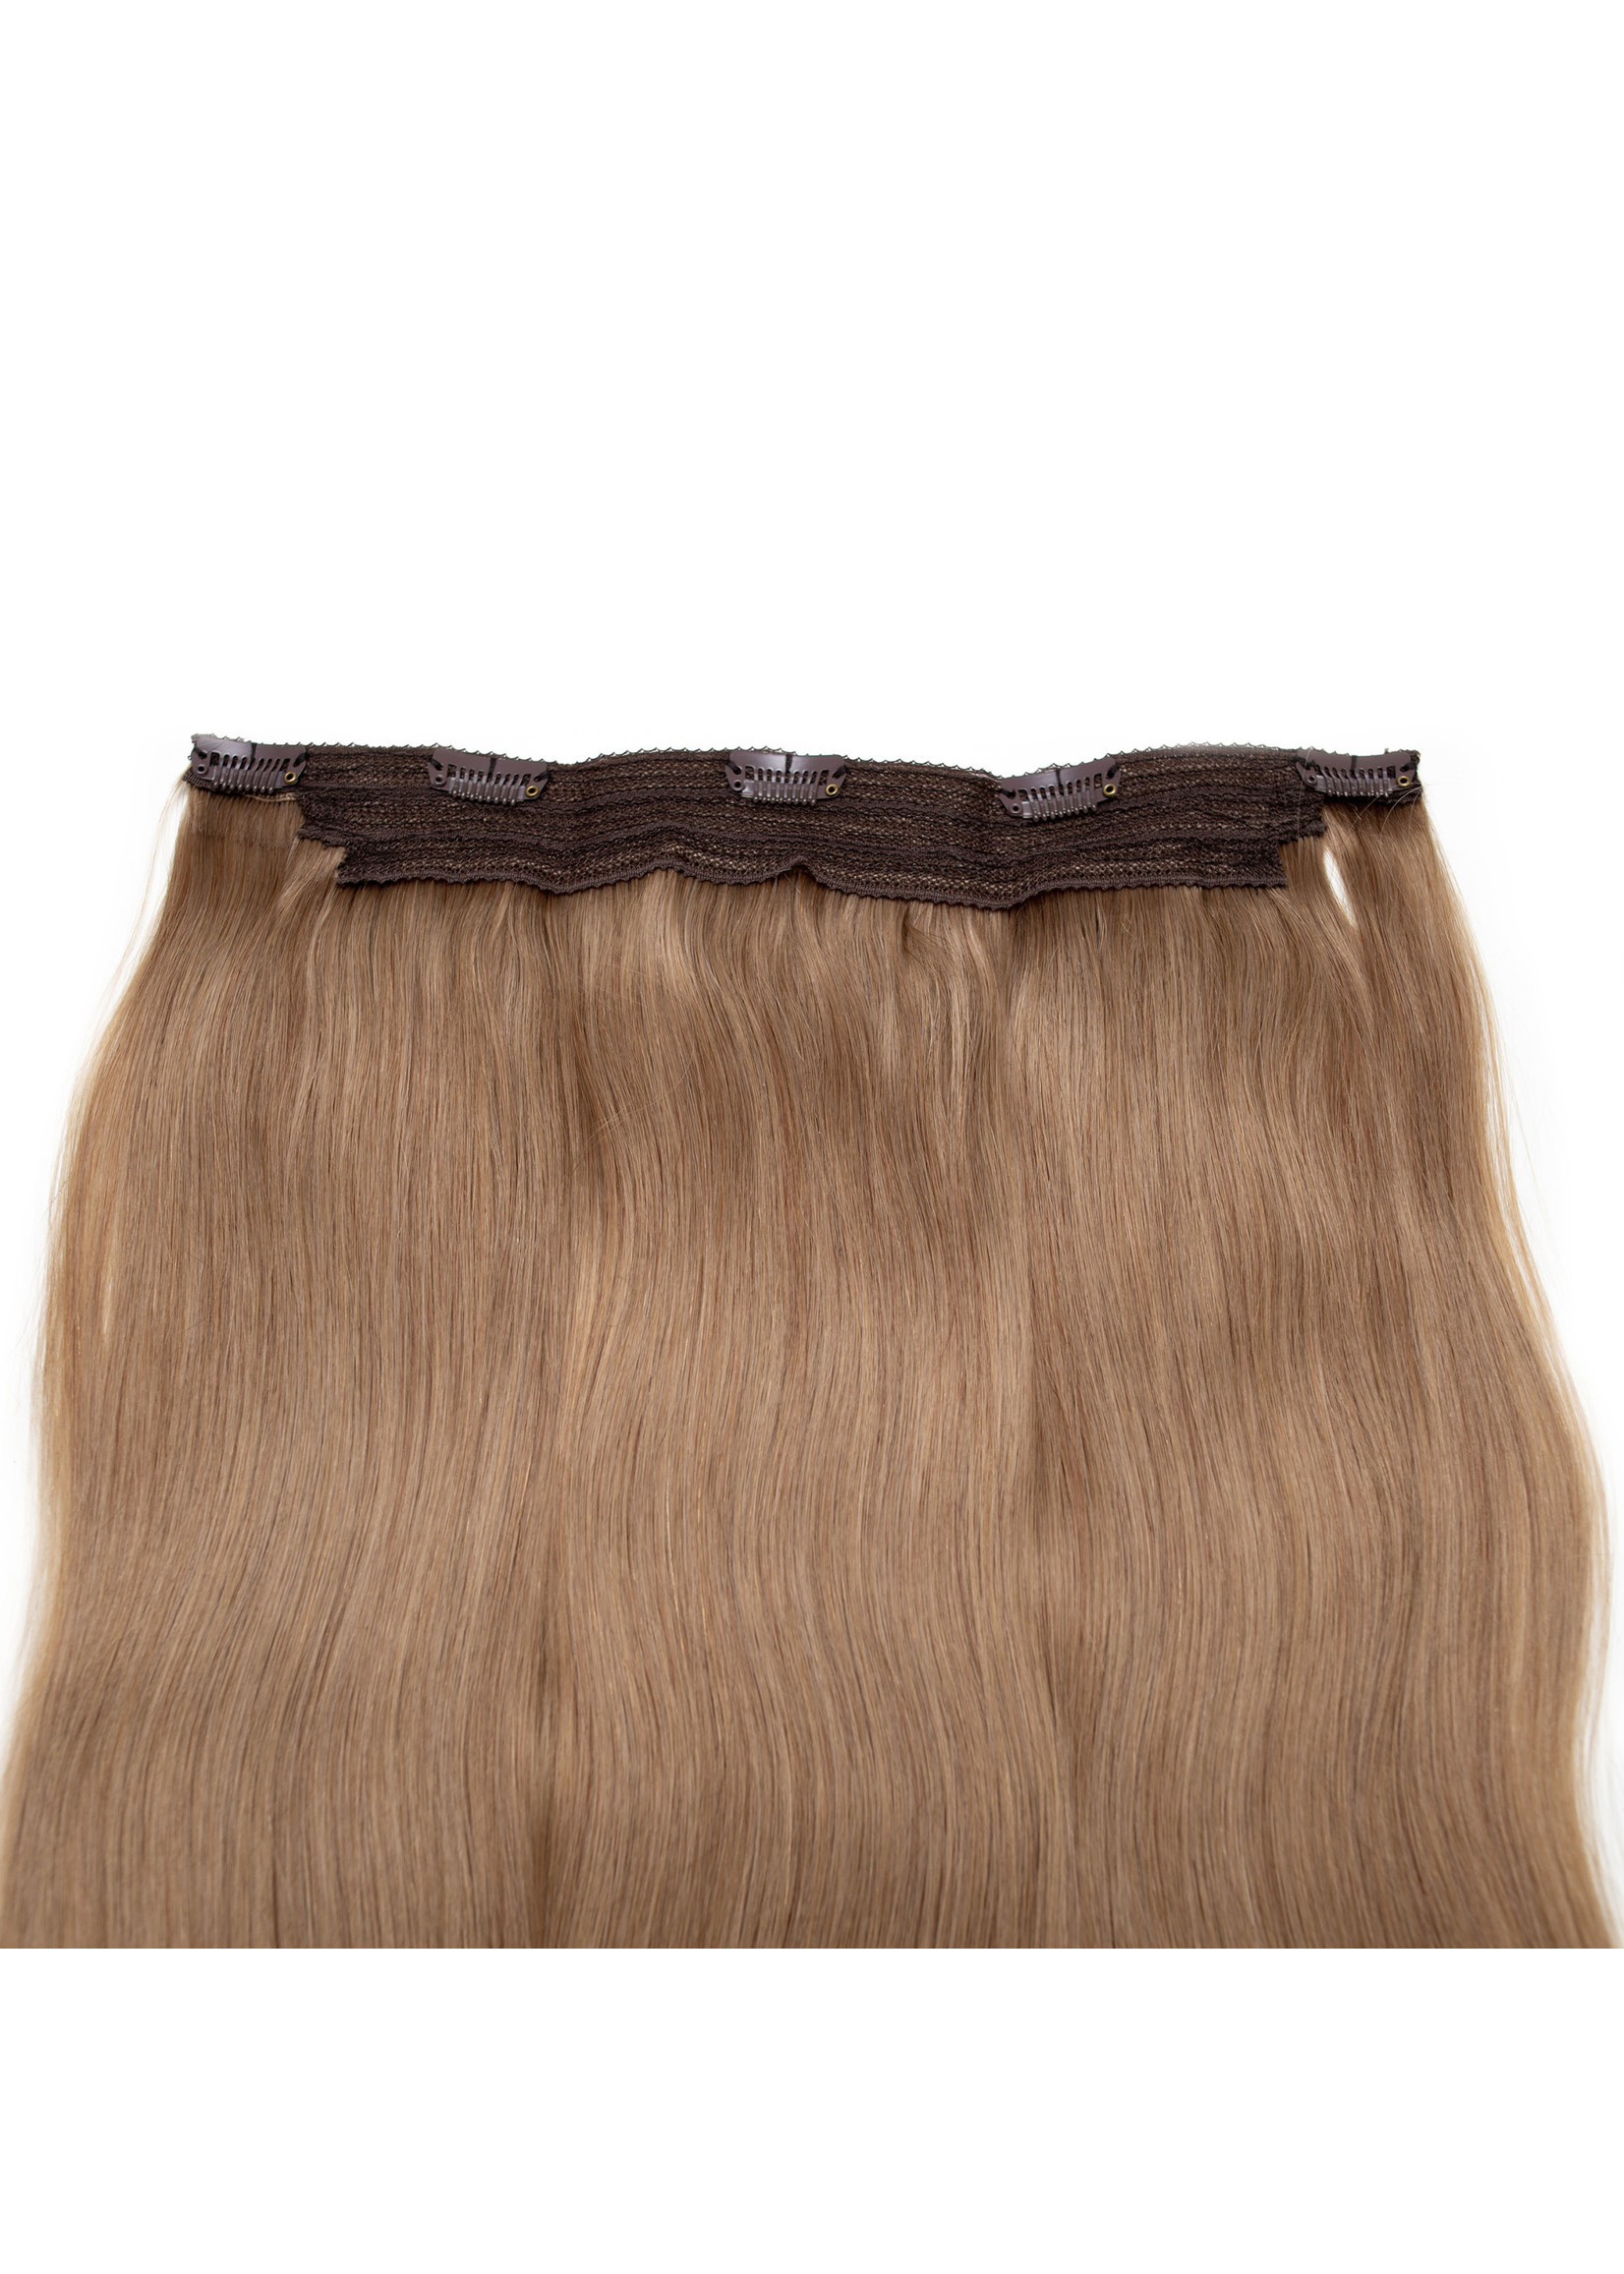 Seamless1 Seamless1 Fibre Clip-in Hair Extensions 22 Inches - Opal